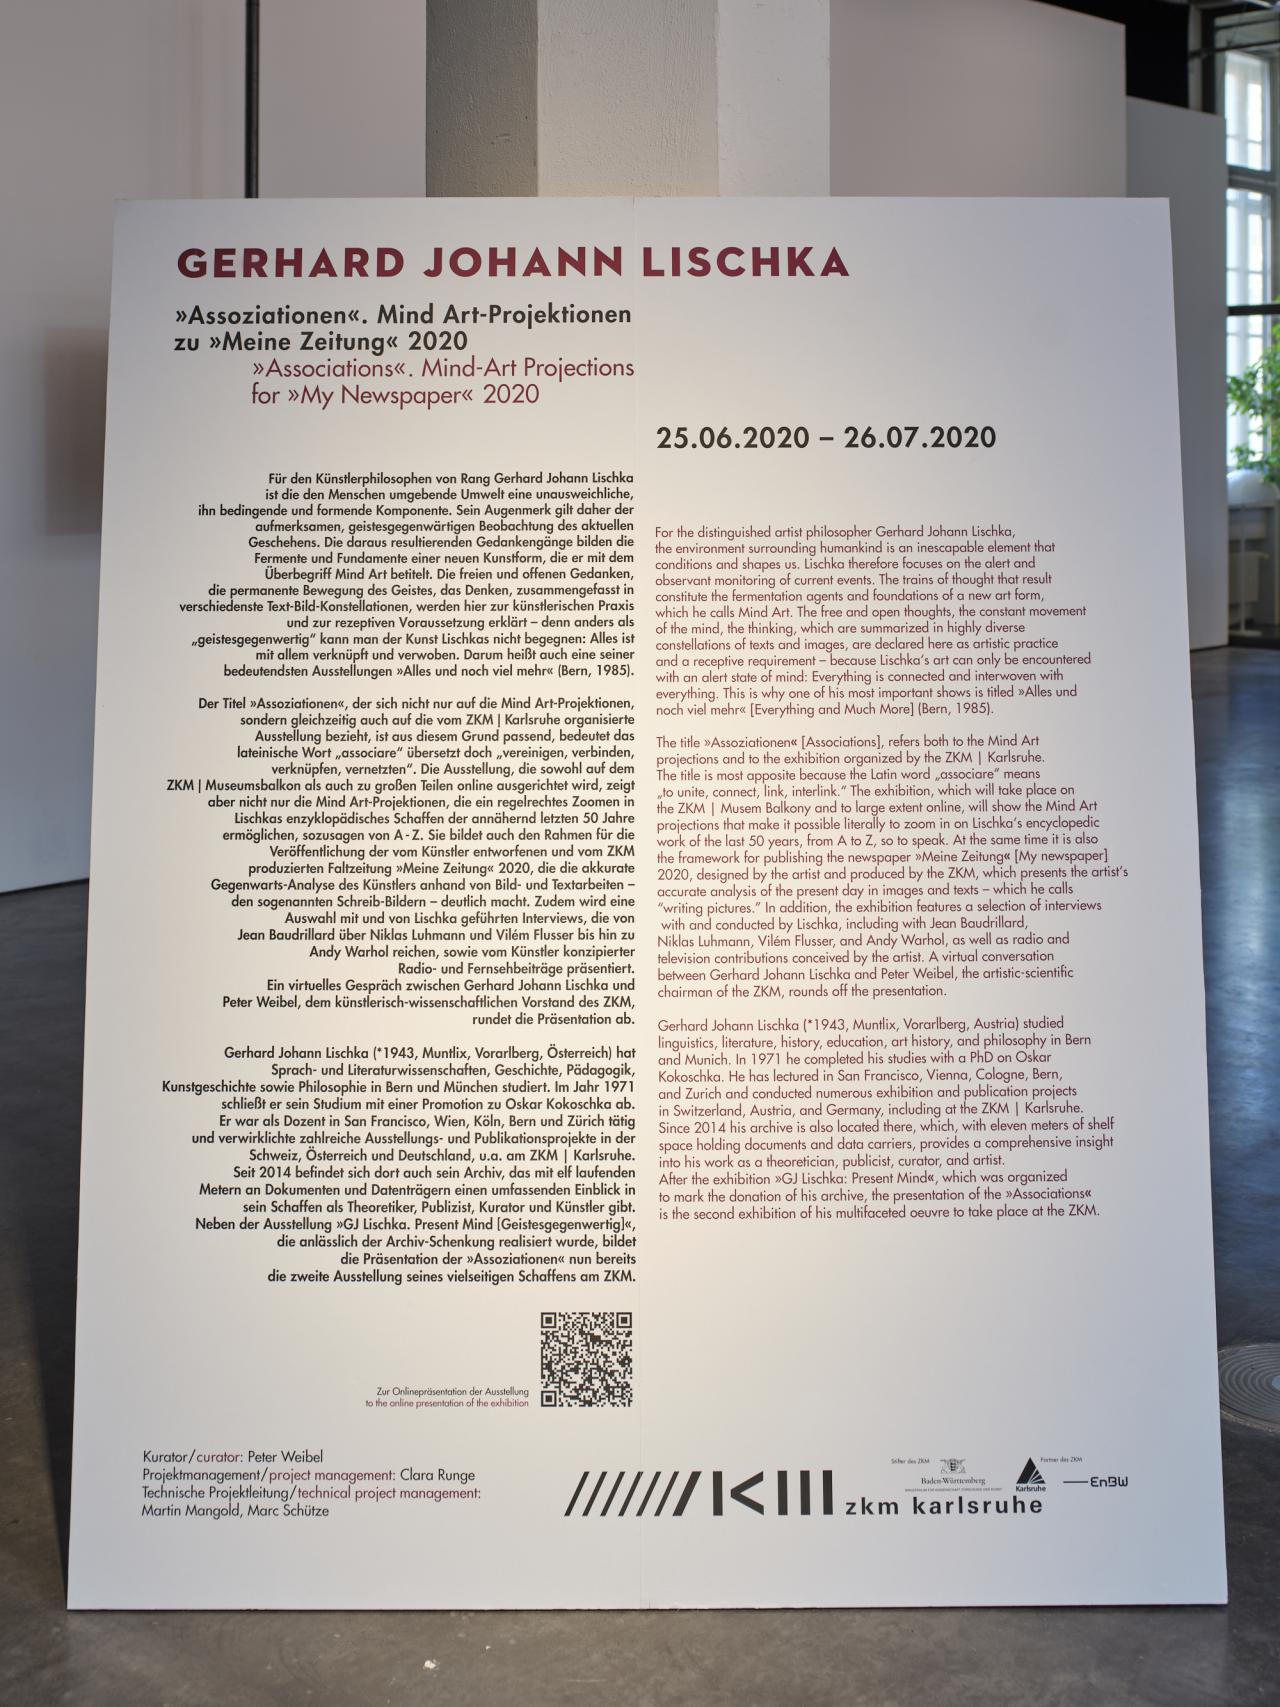 On display is a large plate with the exhibition text on Gerhard Johann Lischka. 